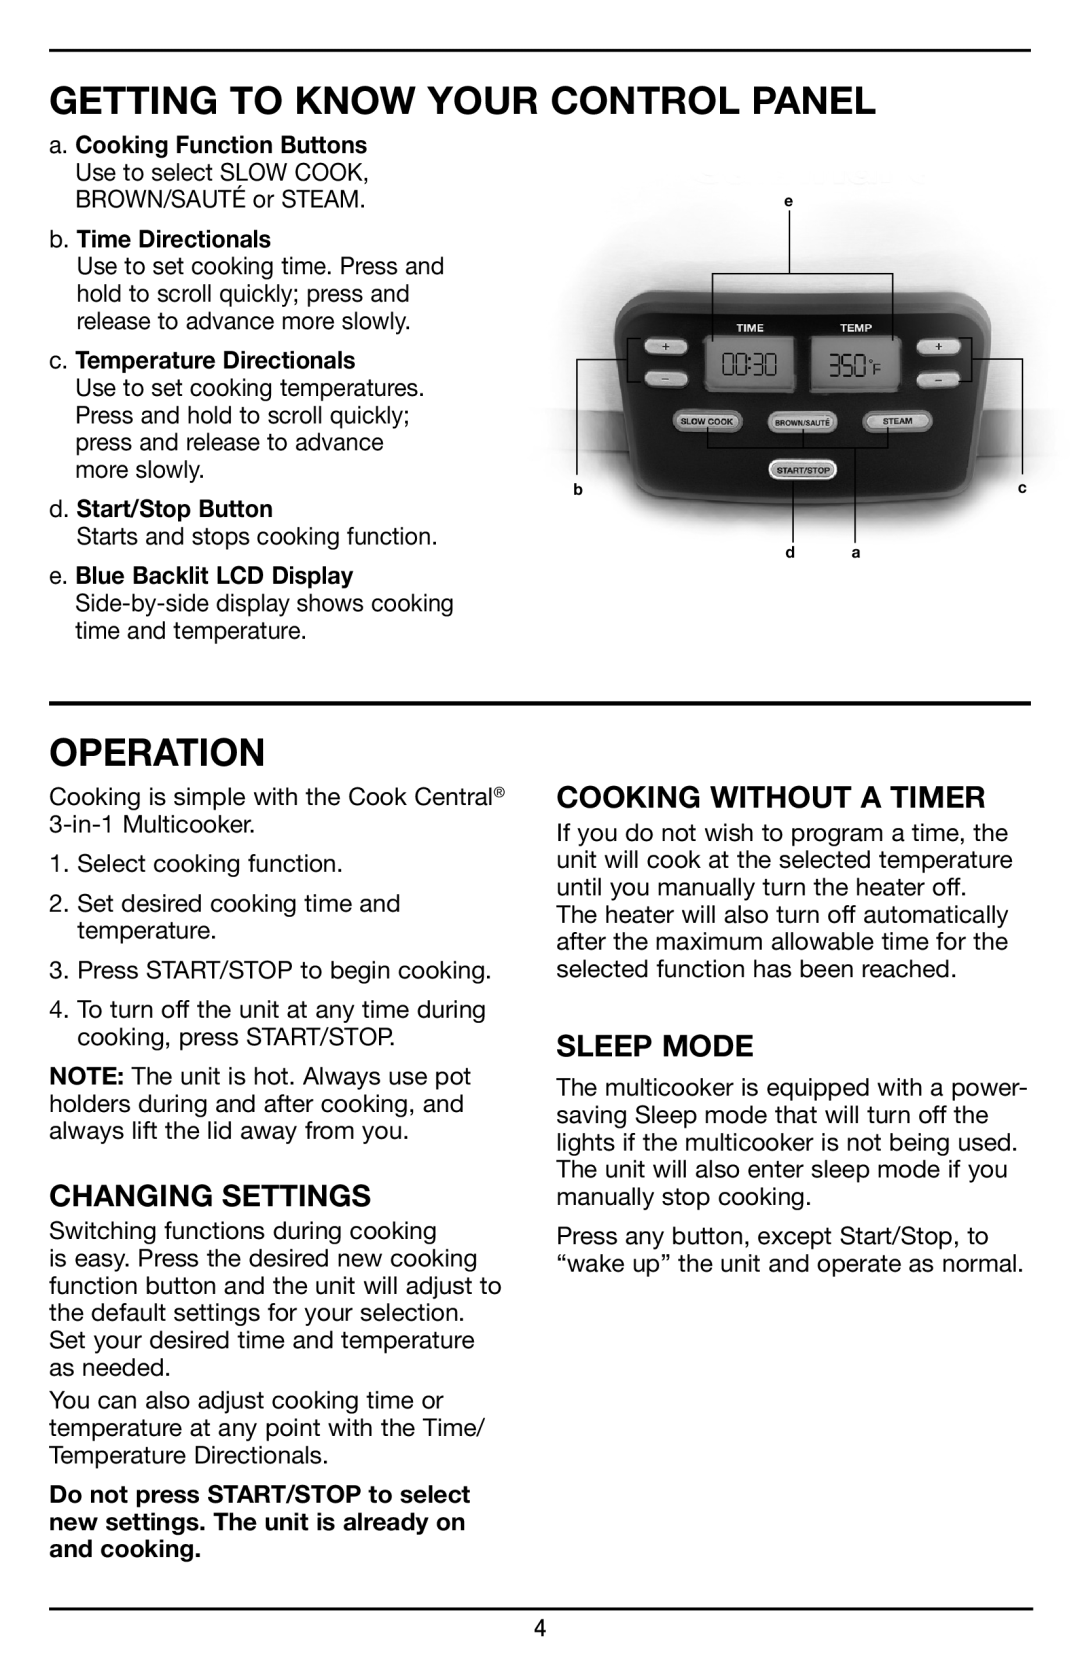 Cuisinart MSC-600 Getting To Know Your Control Panel, Operation, Changing Settings, Cooking Without A Timer, Sleep Mode 